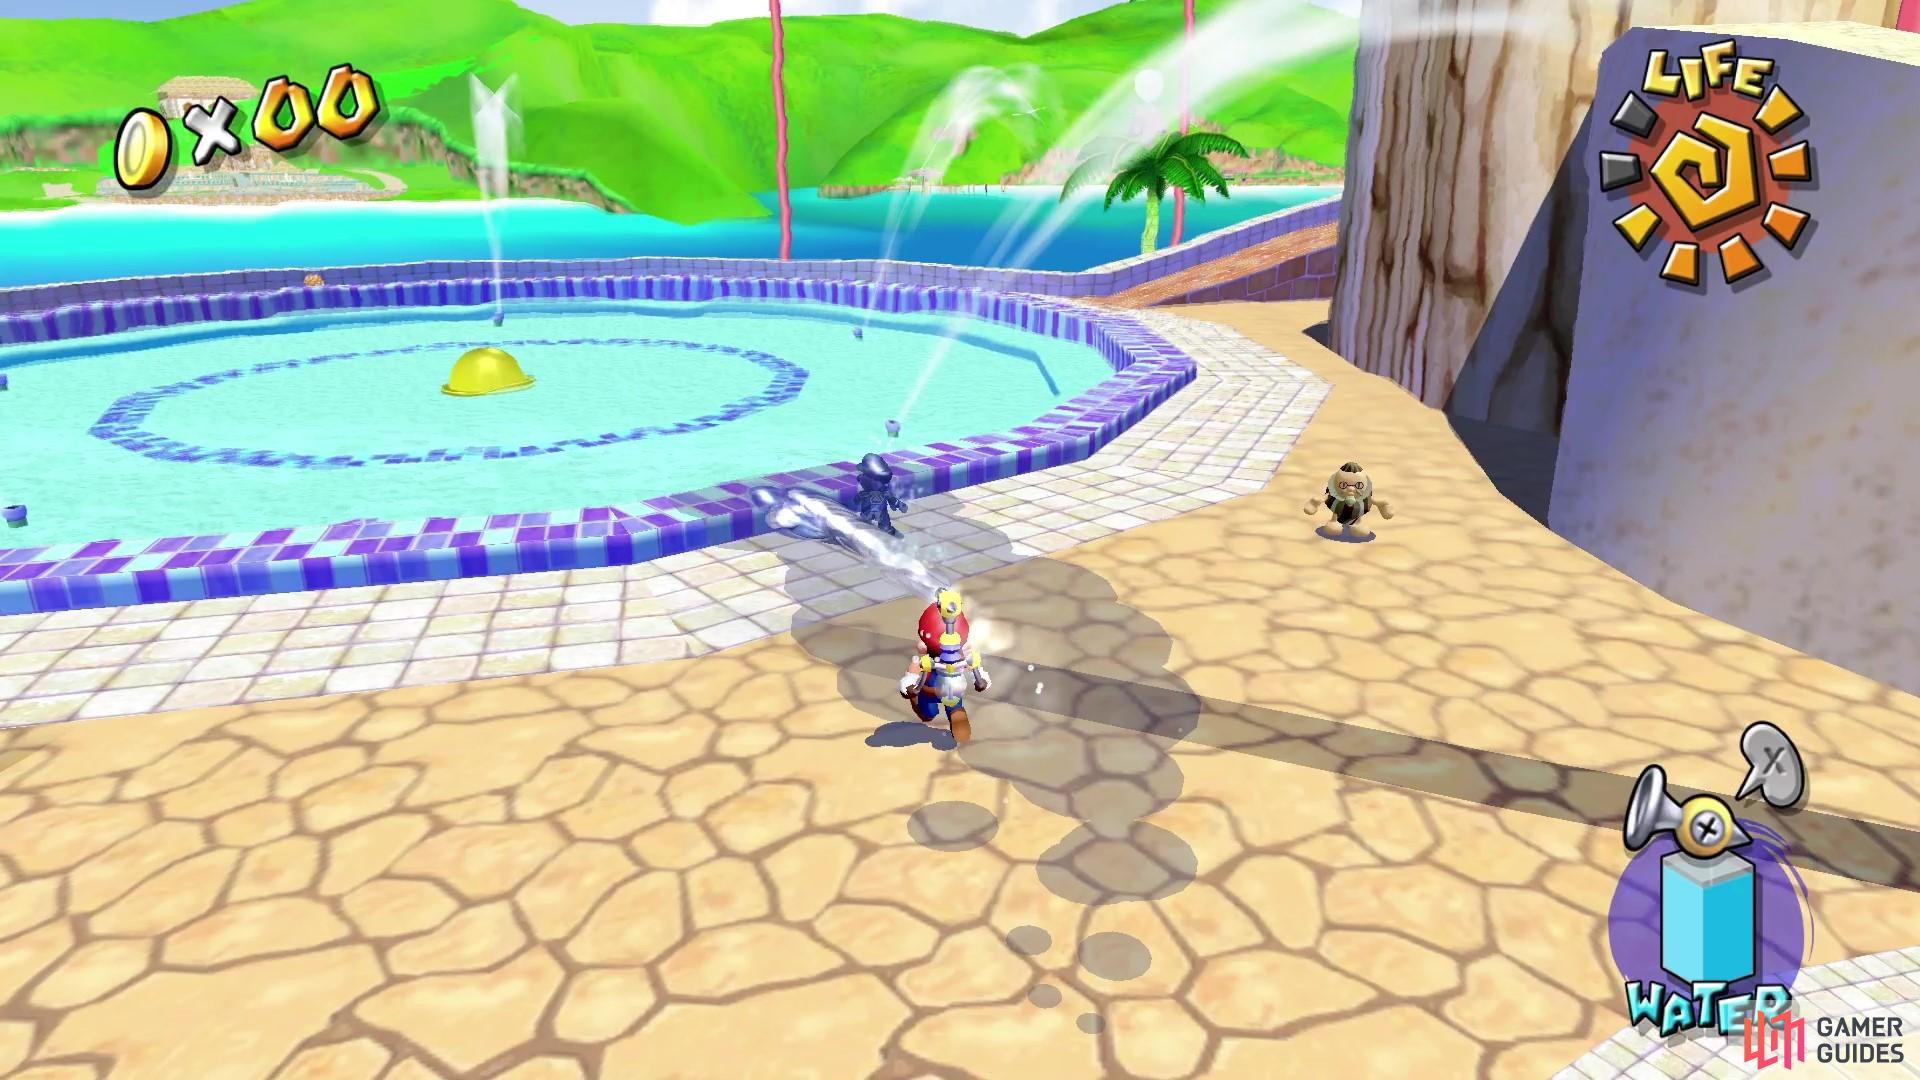 Shadow Mario will take you all around the map